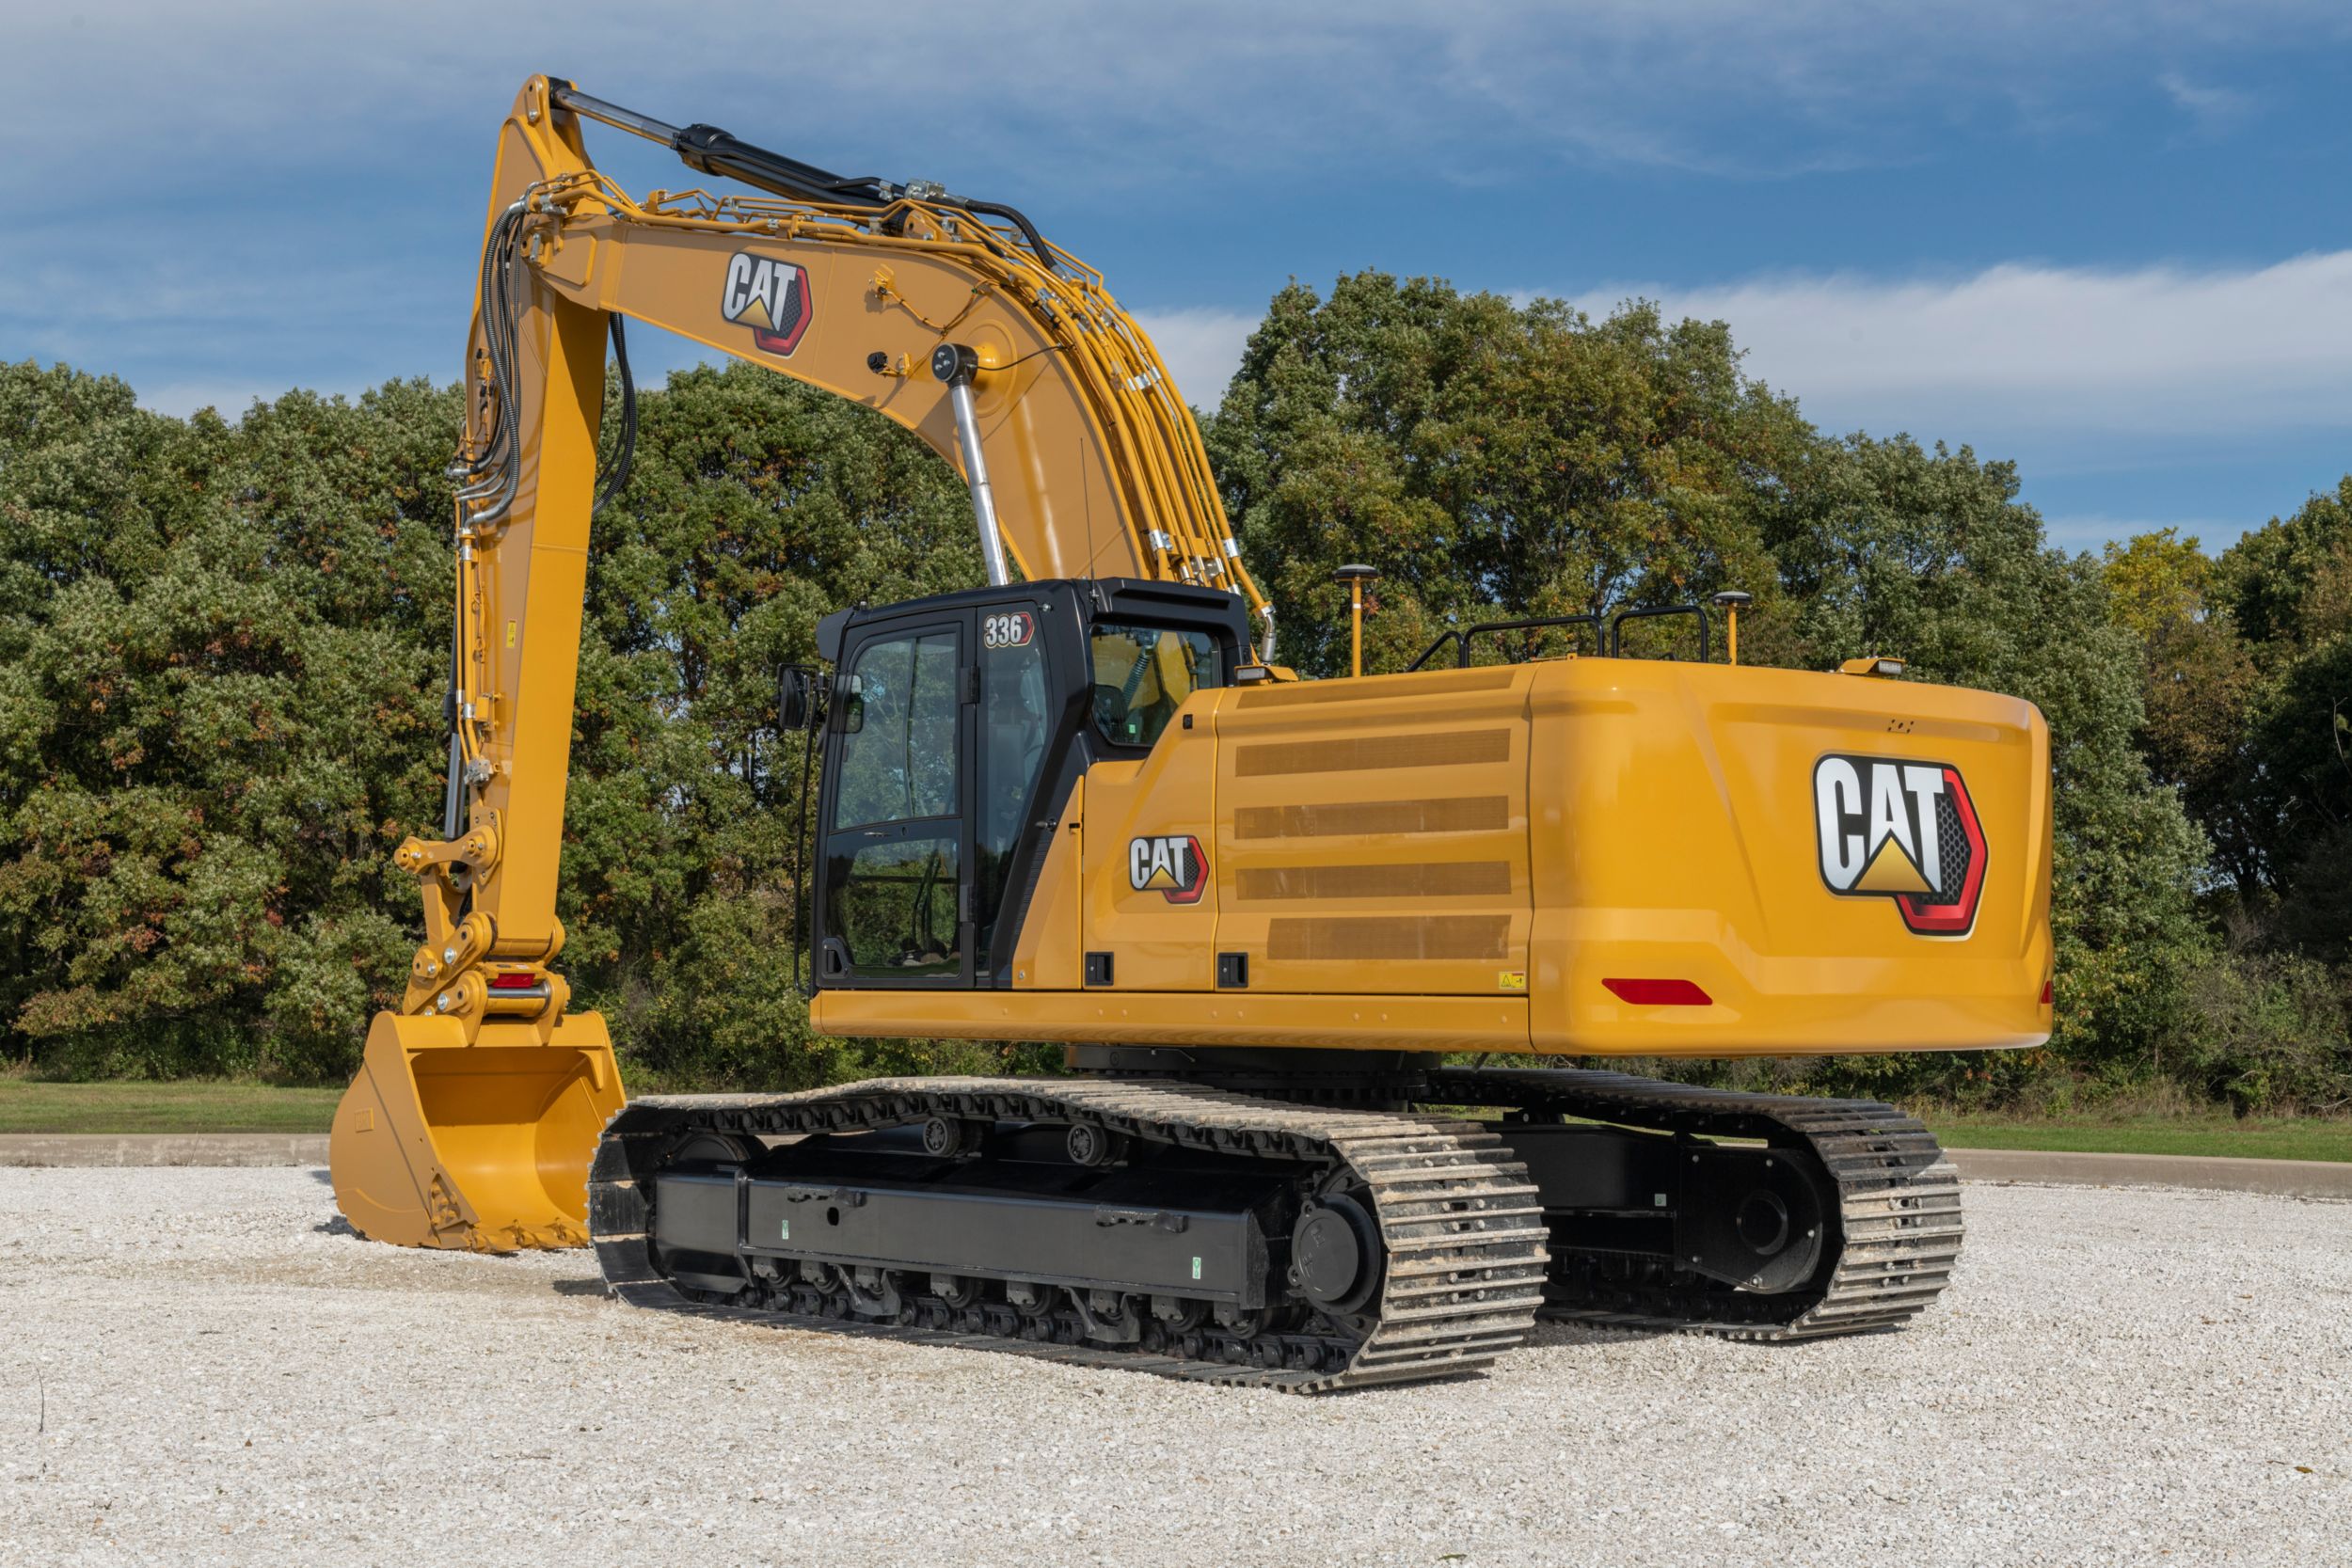 new-cat-336-excavator-delivers-class-leading-productivity-and-low